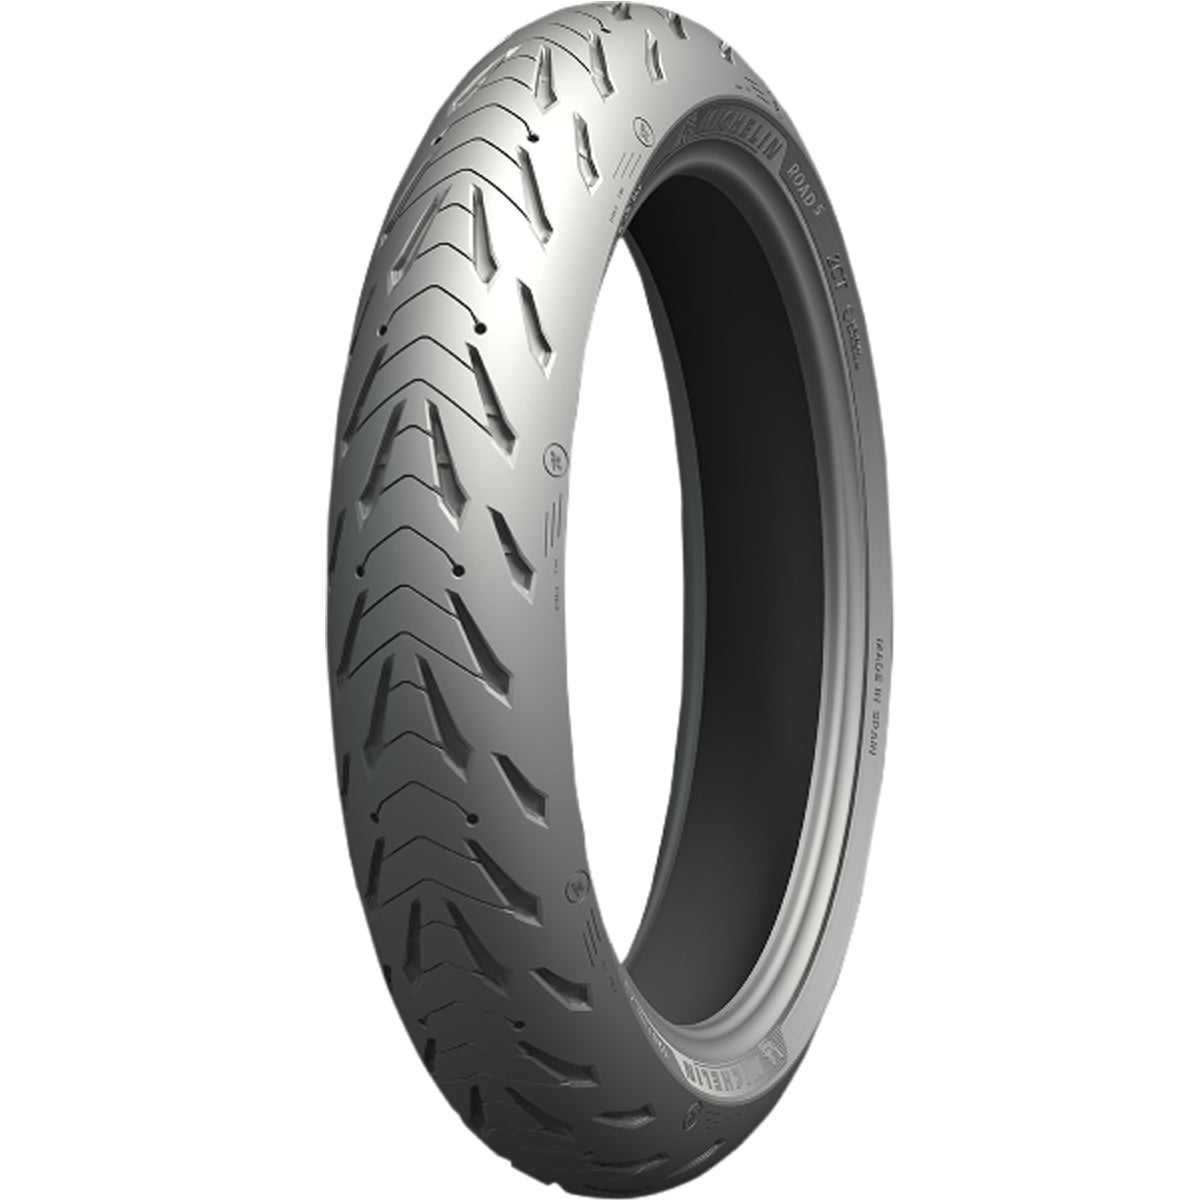 Michelin Road 5 Radial 17" Front Cruiser Tires-0301